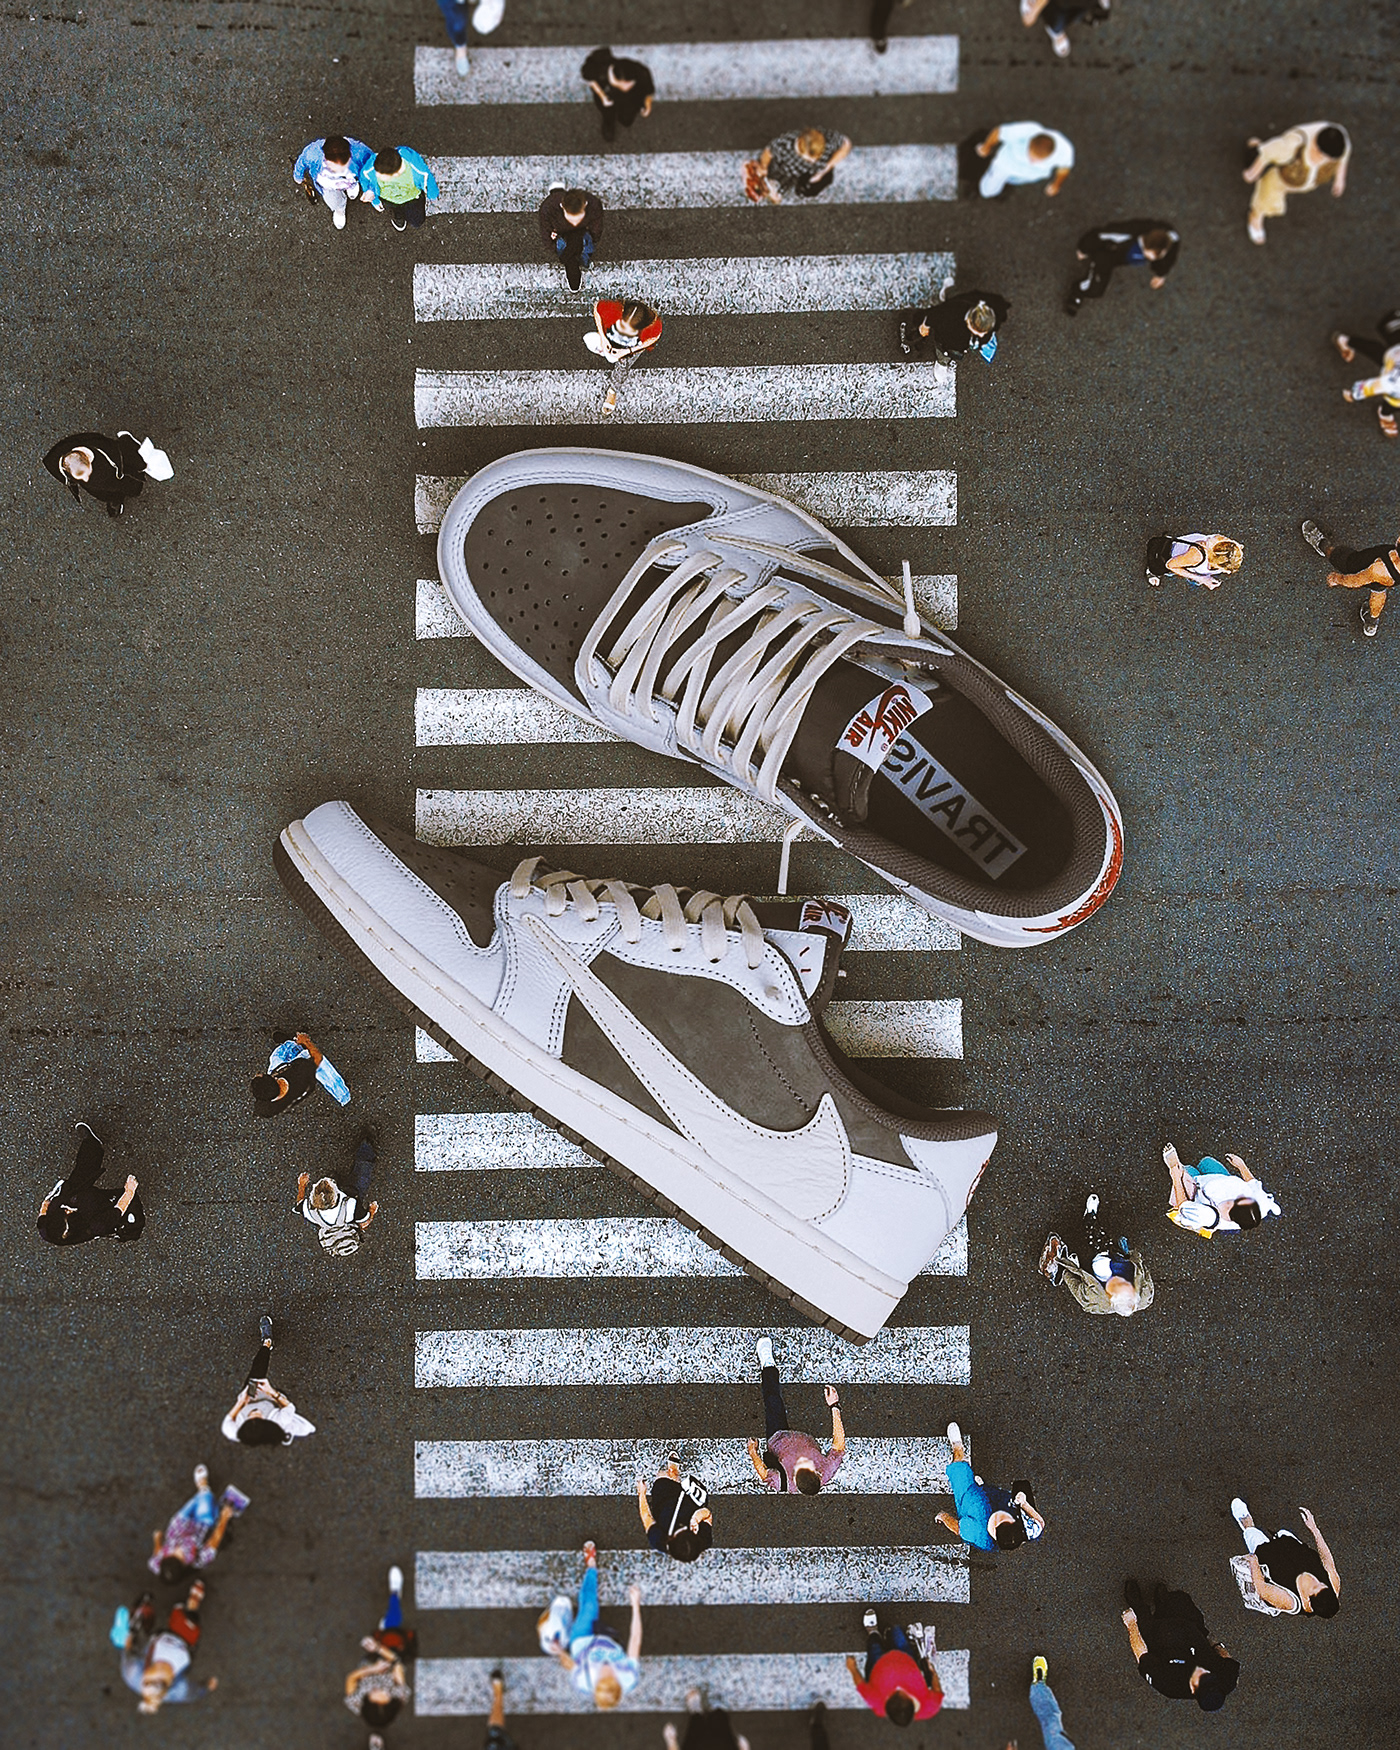 Giant sneaker photo composite in the city . Retouching using Photoshop